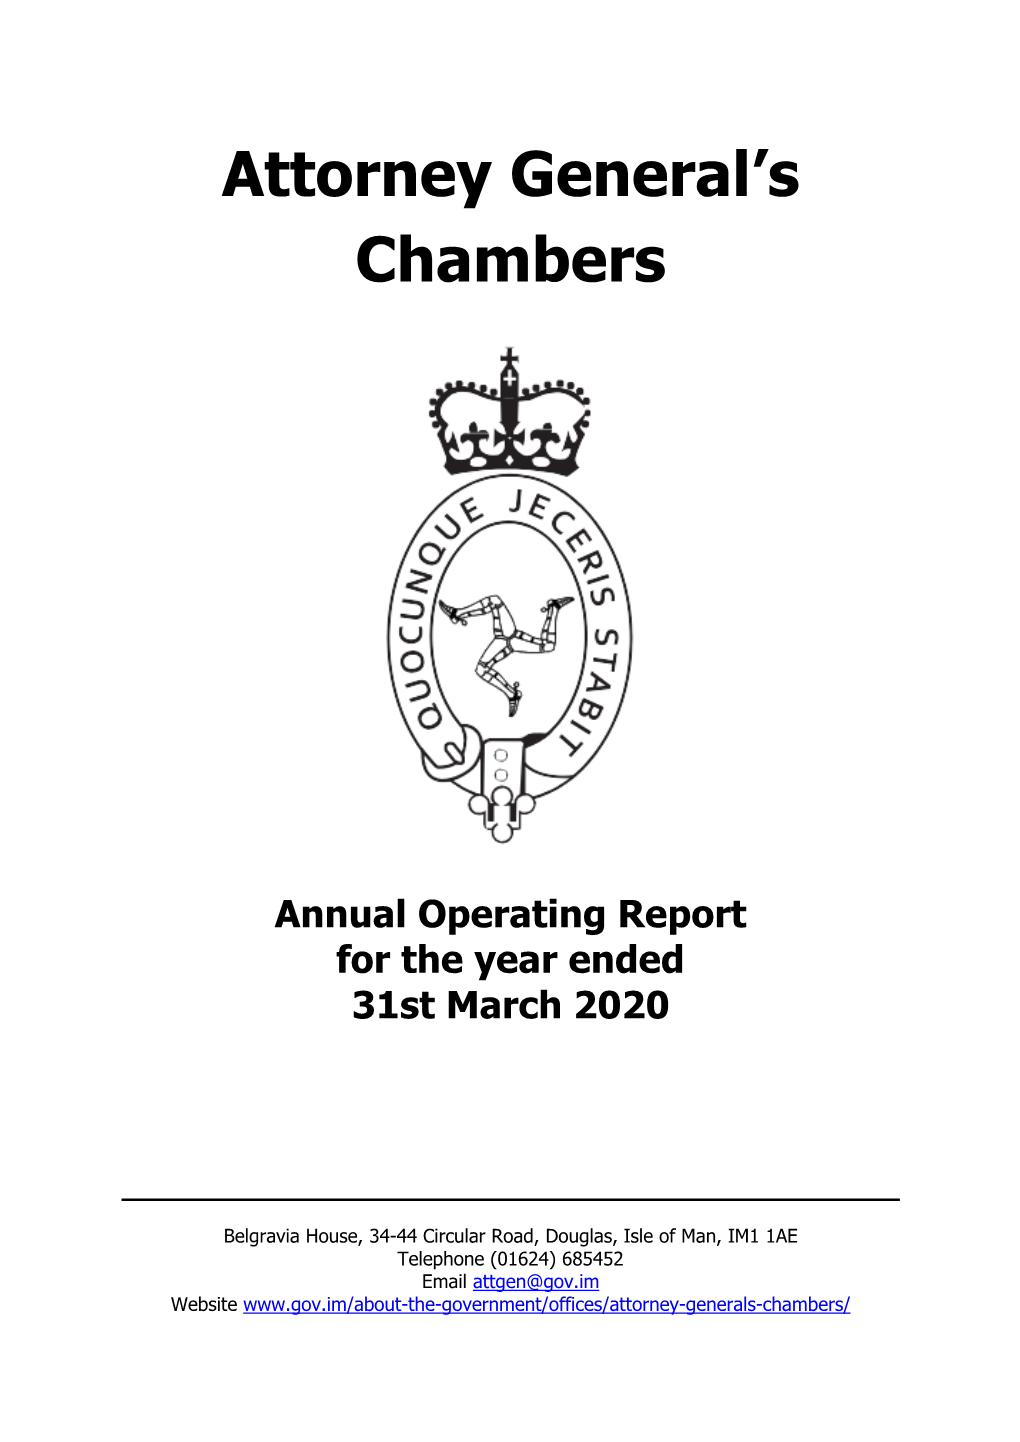 AGC Annual Operating Report for the Year